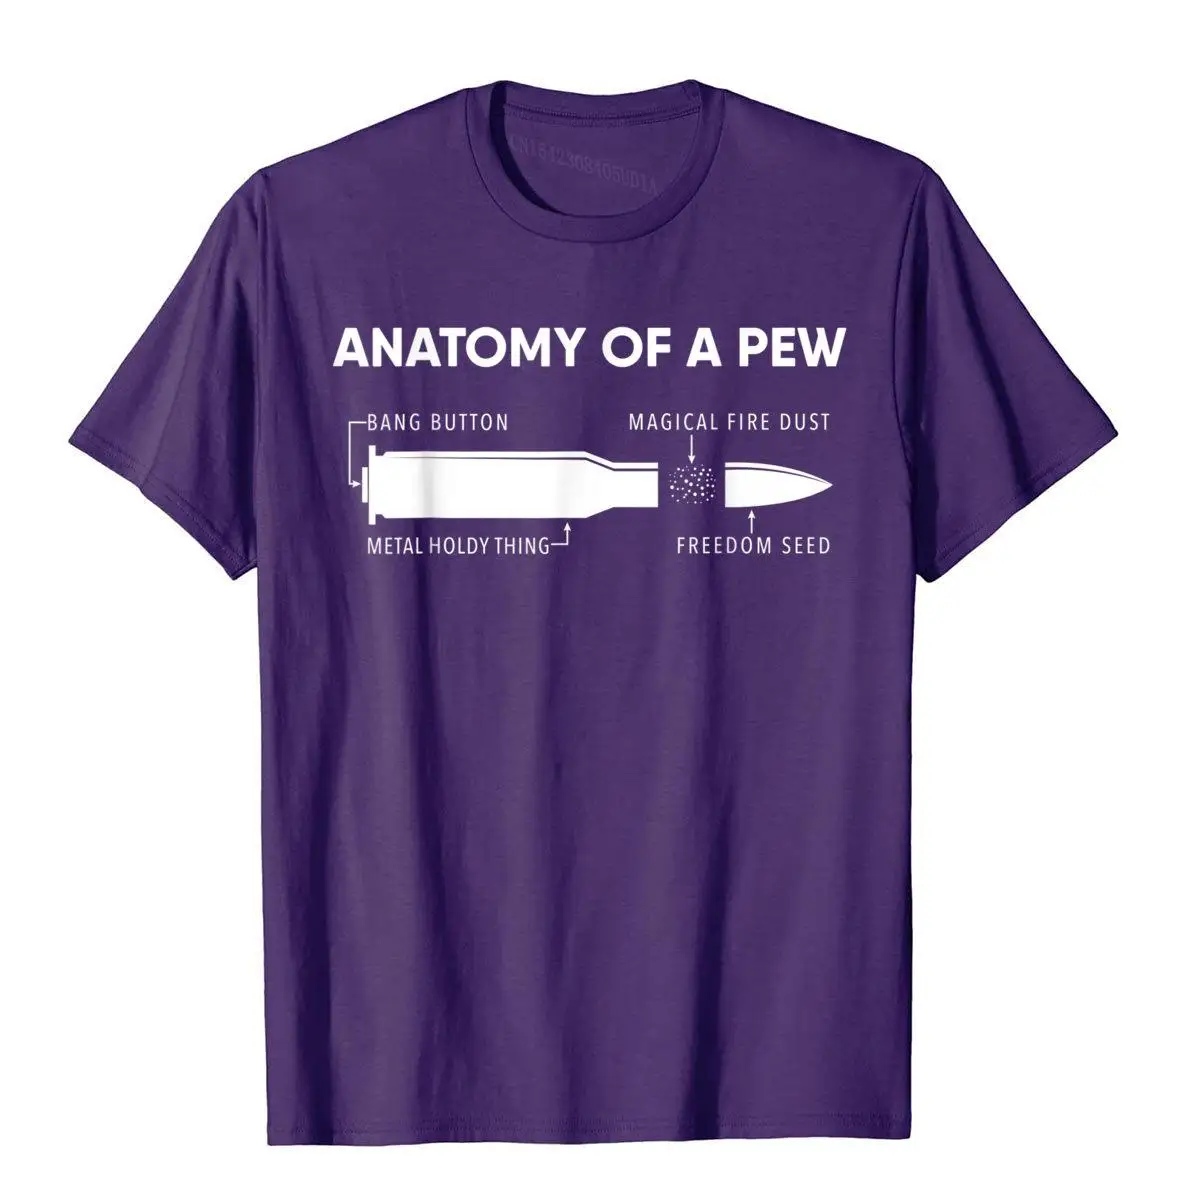 Anatomy Of A Pew Shirt Funny Bullet Graphic T-Shirt Gift__B5379purple